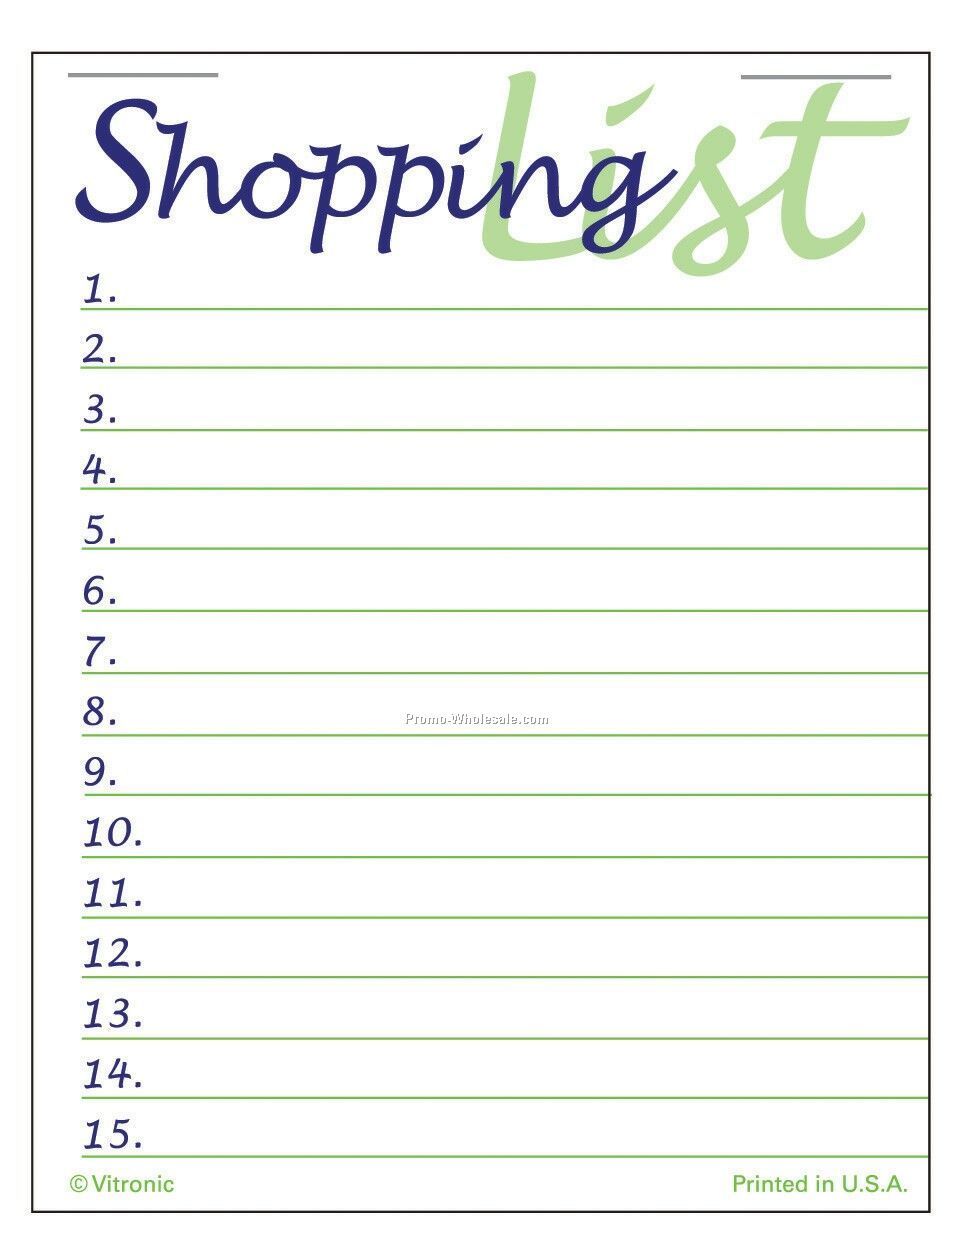 Step 7 of Nanowrimo Planning: Your Shopping List! - FIGHT to WRITE